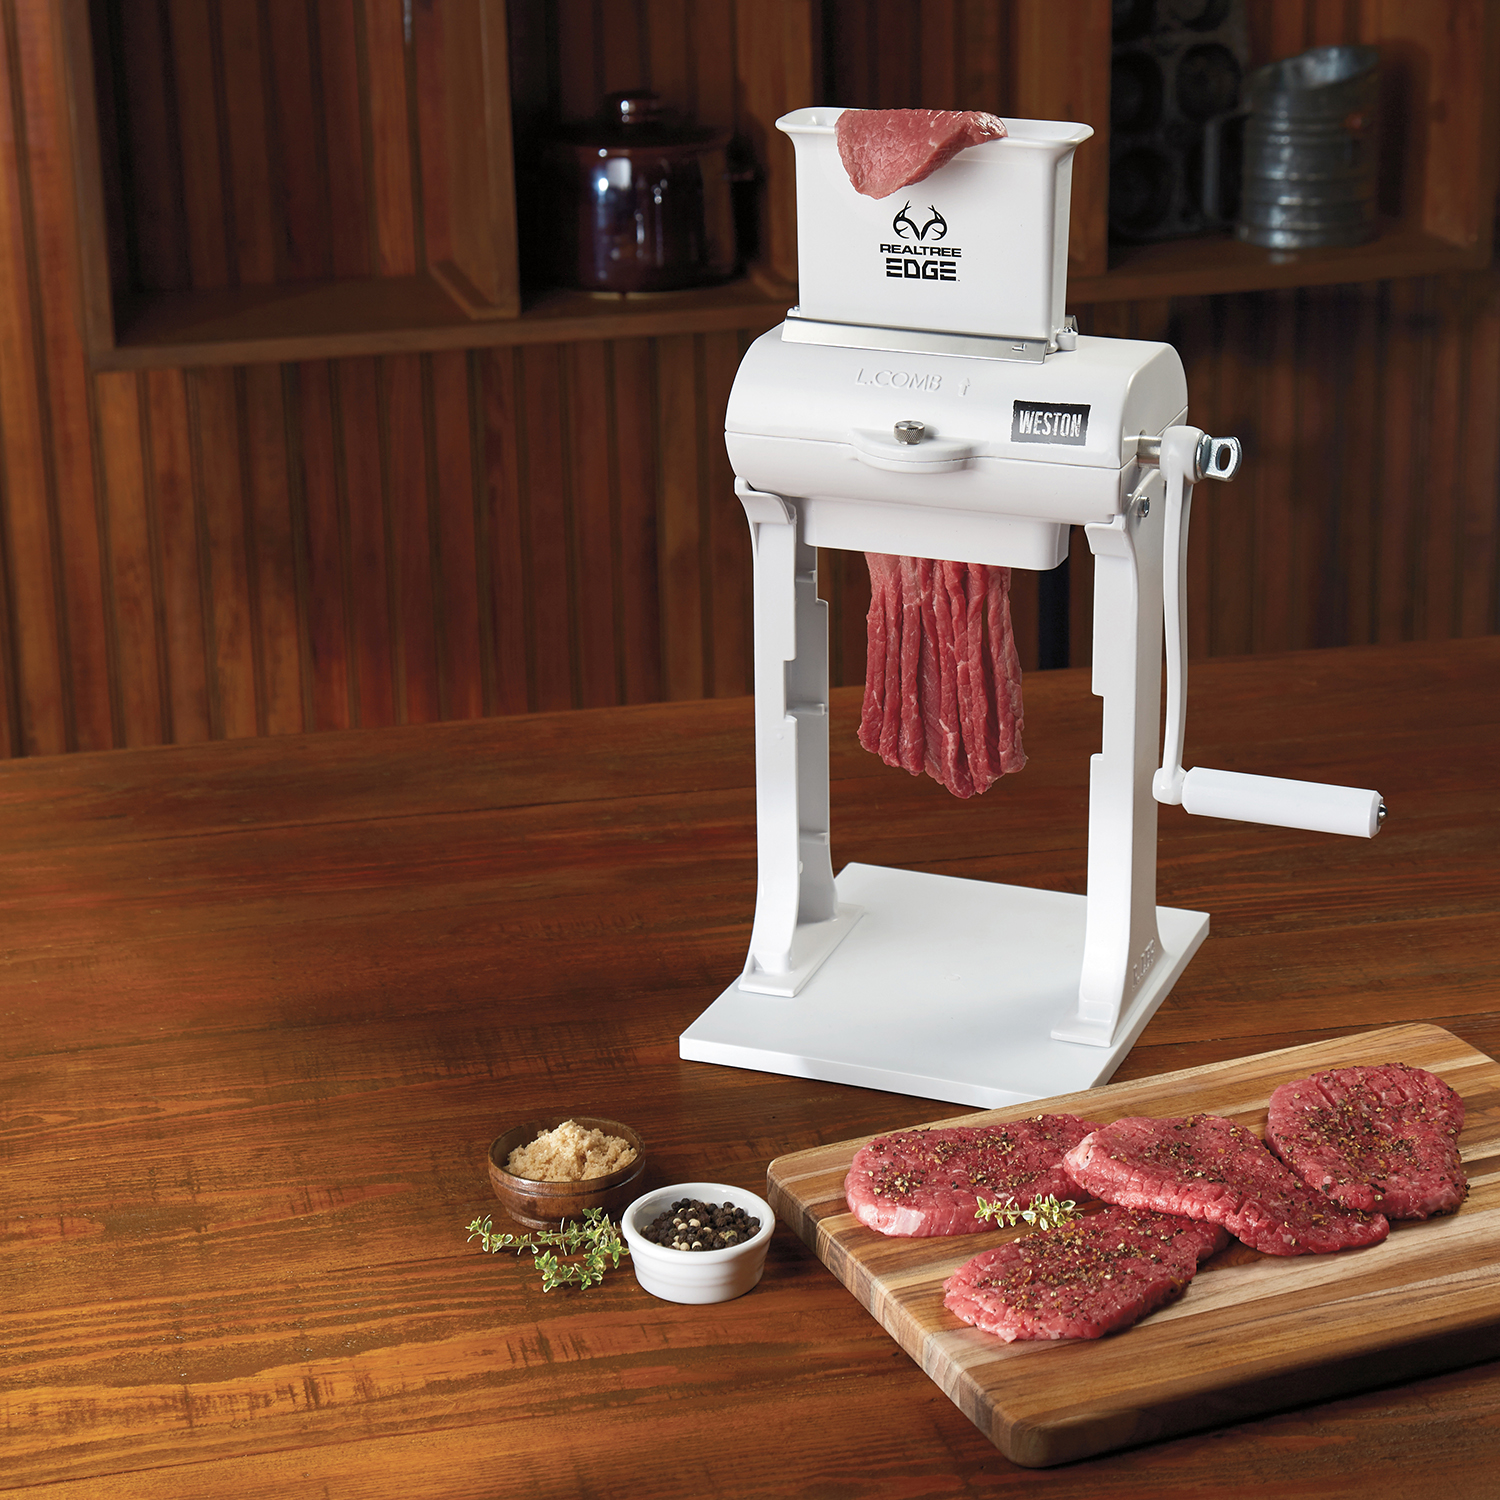 Realtree® 2 in 1 Jerky Slicer and Cuber/Tenderizer- 07-3701-RE